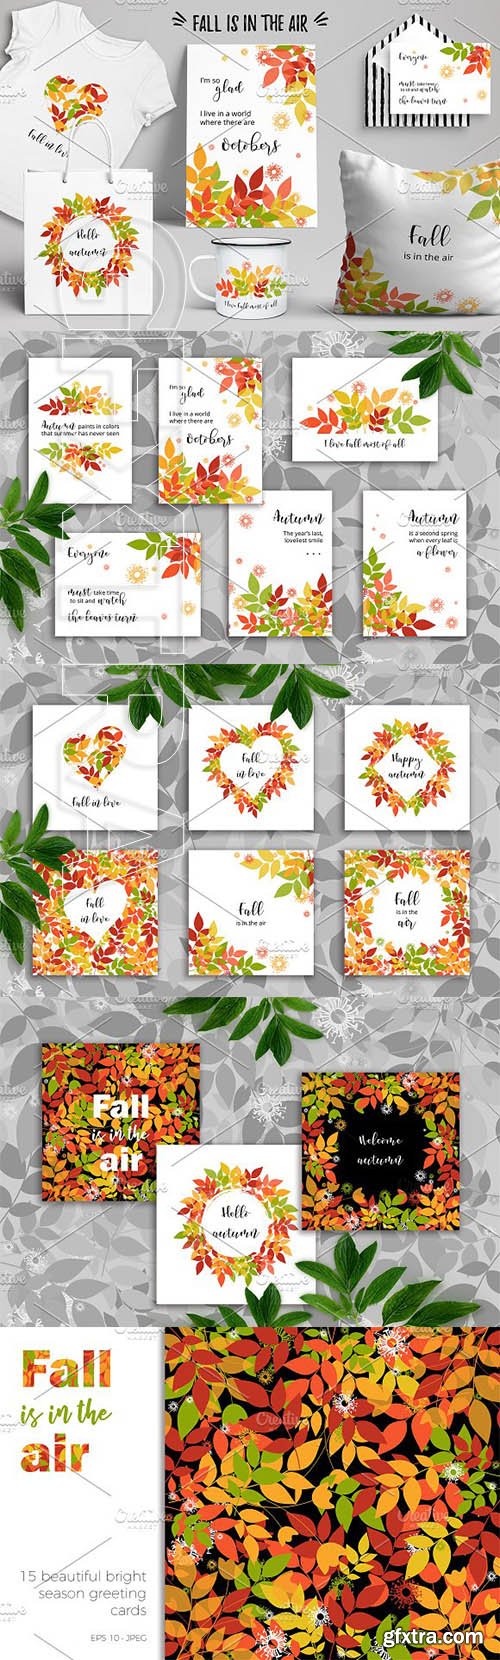 CreativeMarket - Fall is in the air 2246899